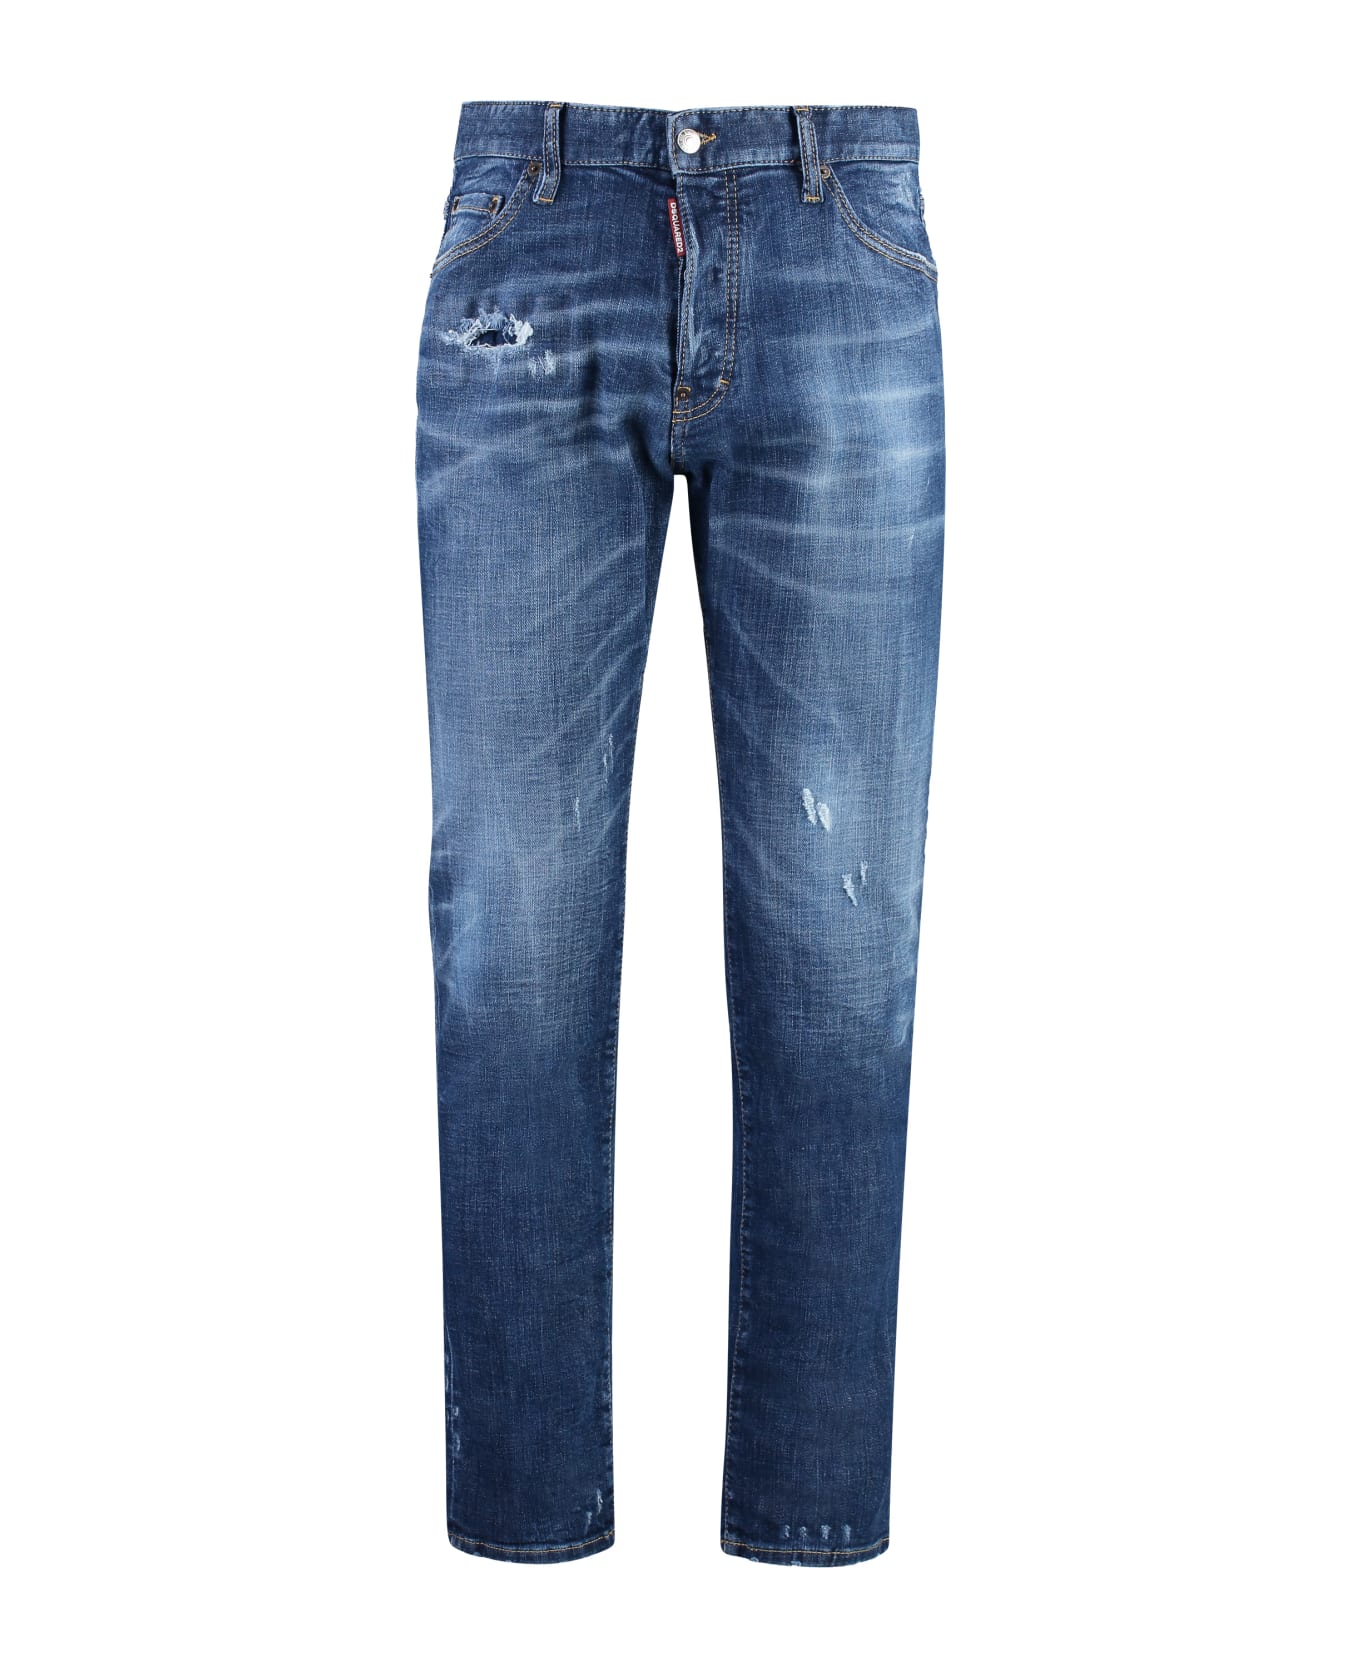 Dsquared2 Cool-guy Jeans - Navy Blue